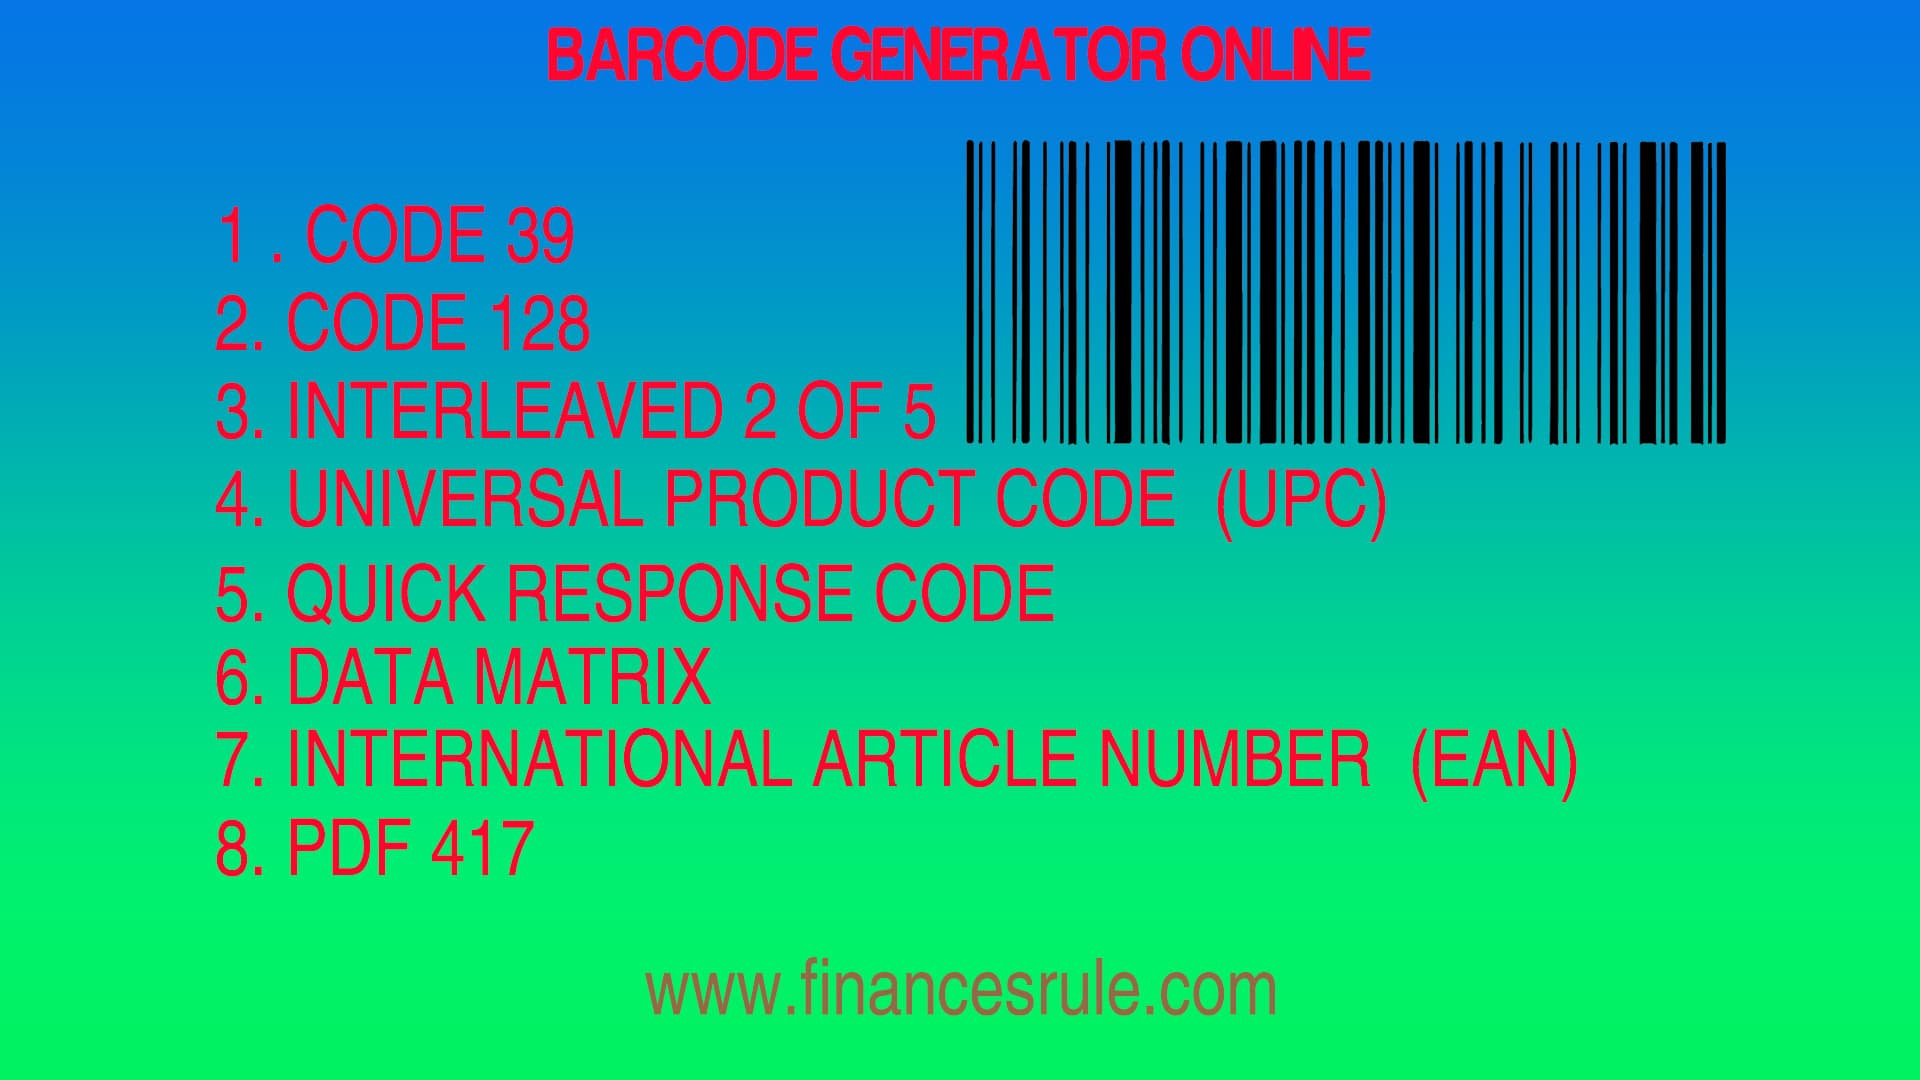 barcode-generator-how-to-create-single-multiple-barcode-online